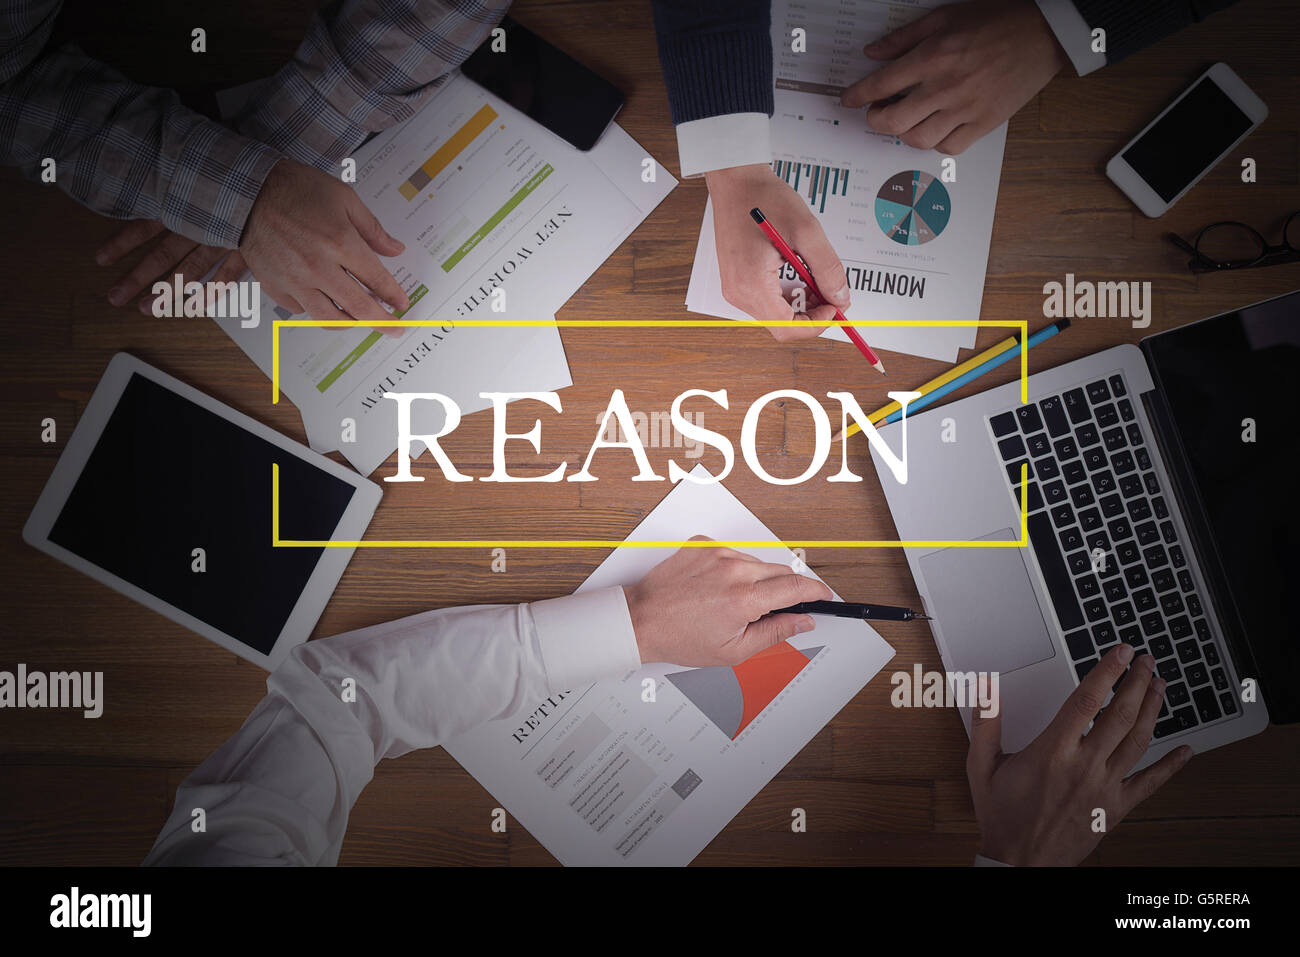 BUSINESS TEAM WORKING OFFICE  Reason TEAMWORK BRAINSTORMING CONCEPT Stock Photo